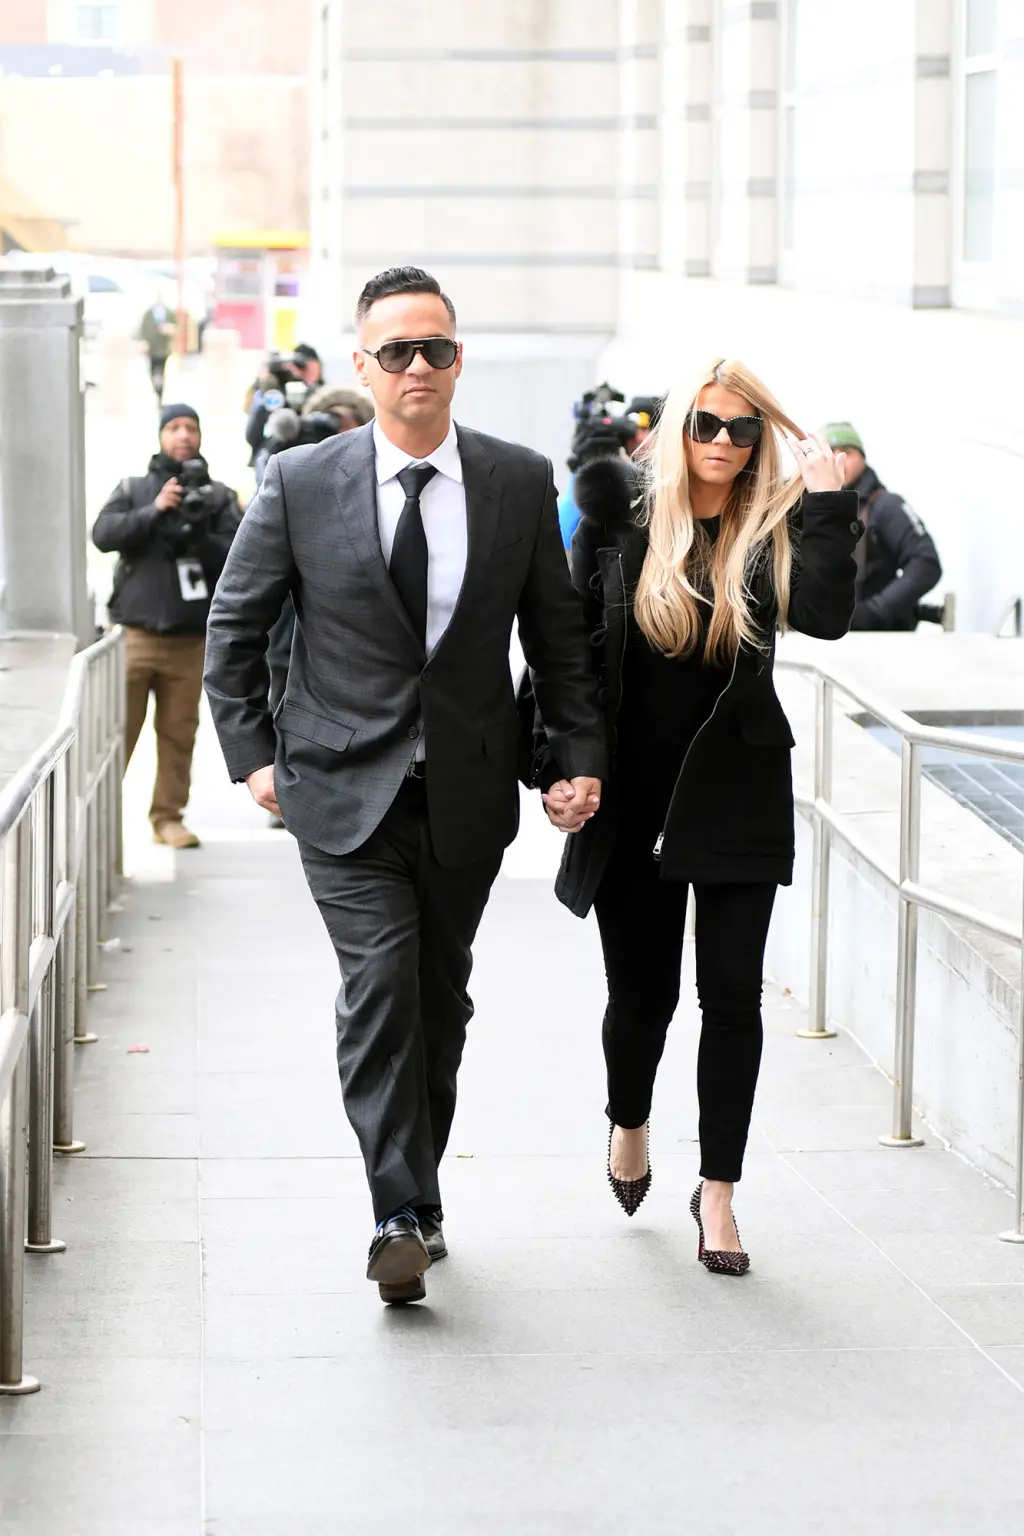 Mike ‘The Situation’ Sorrentino